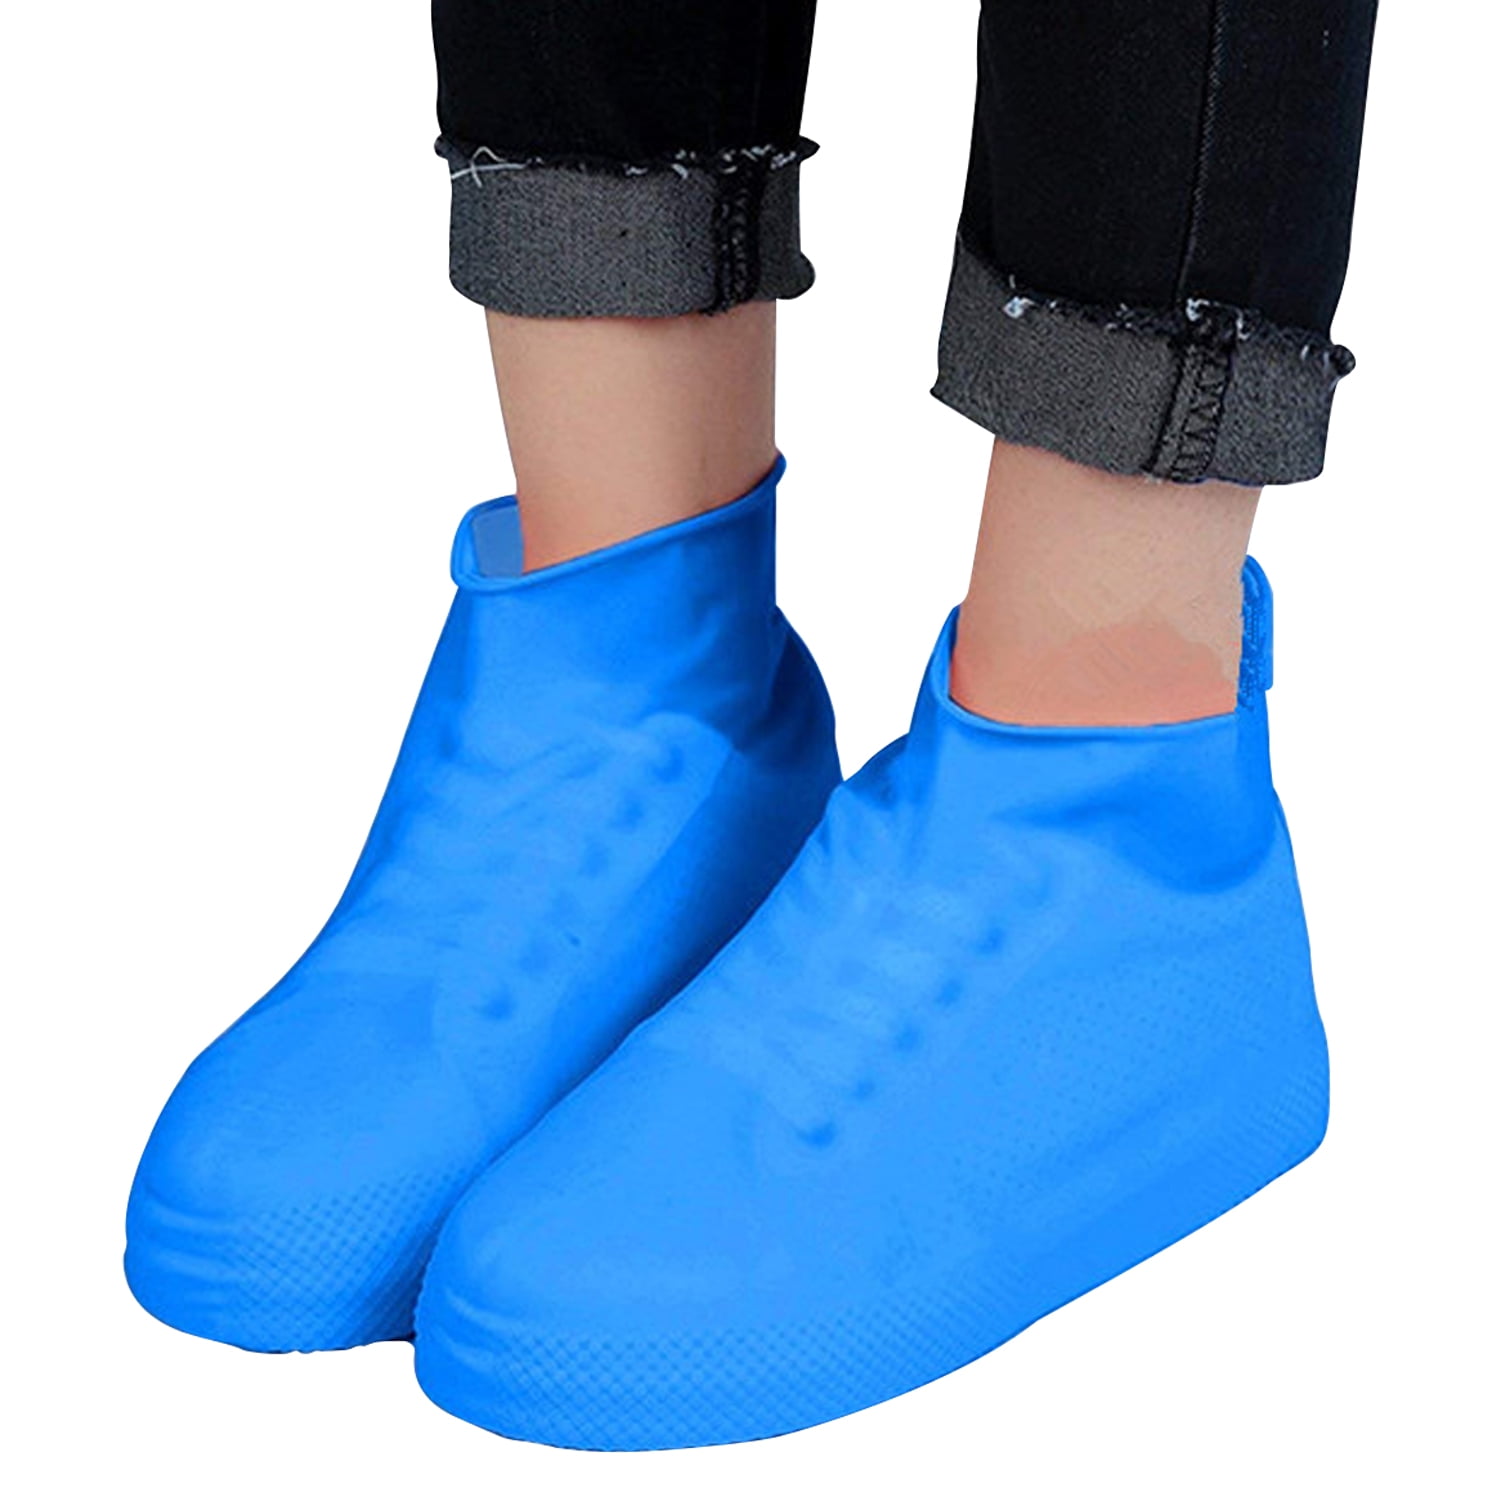 Details about   Waterproof Shoes Cover Silicone Rubber Wear-Resistant Rain Boots Shoe Cover US 